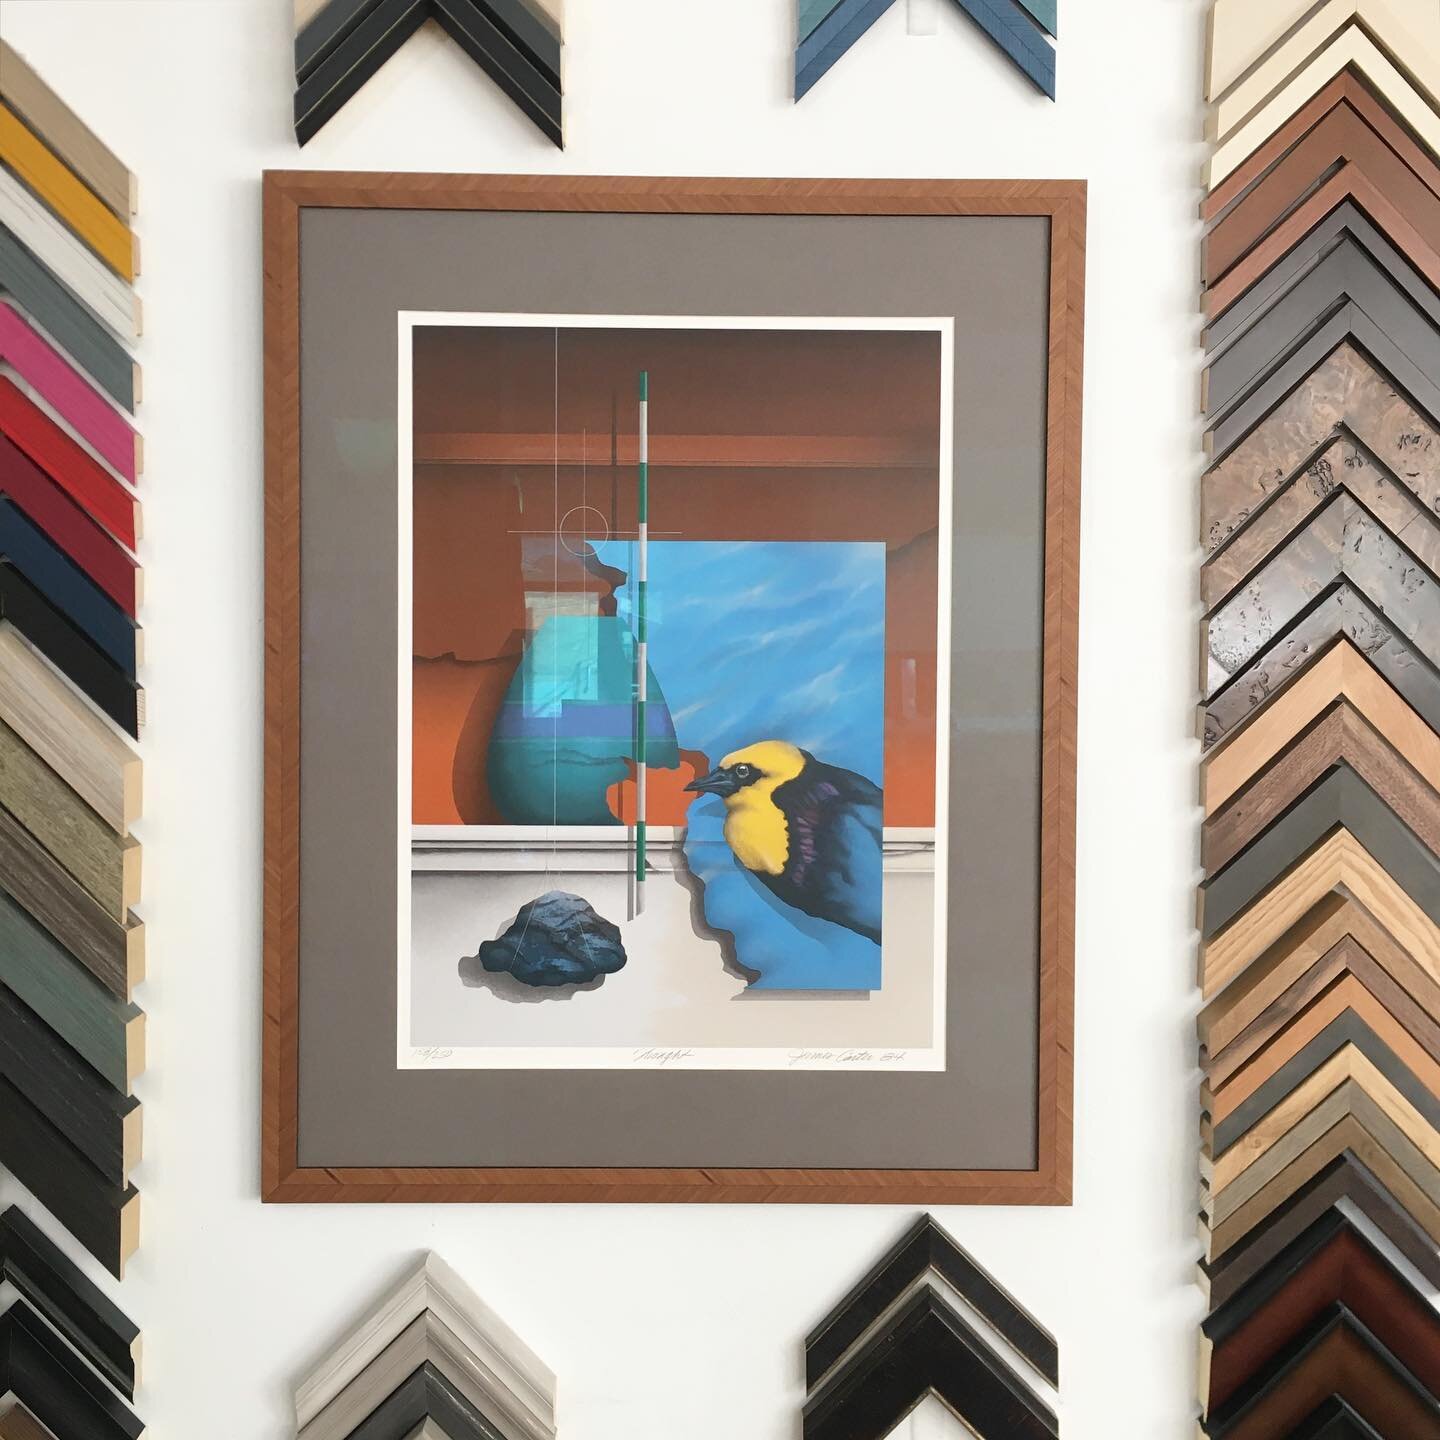 One of our favorite pieces hanging in the shop is this James Carter print! Features a feathery, herringbone profile from @bellamoulding 🪶
#surrealist #birds #allday #customframing #handmade #frameshop